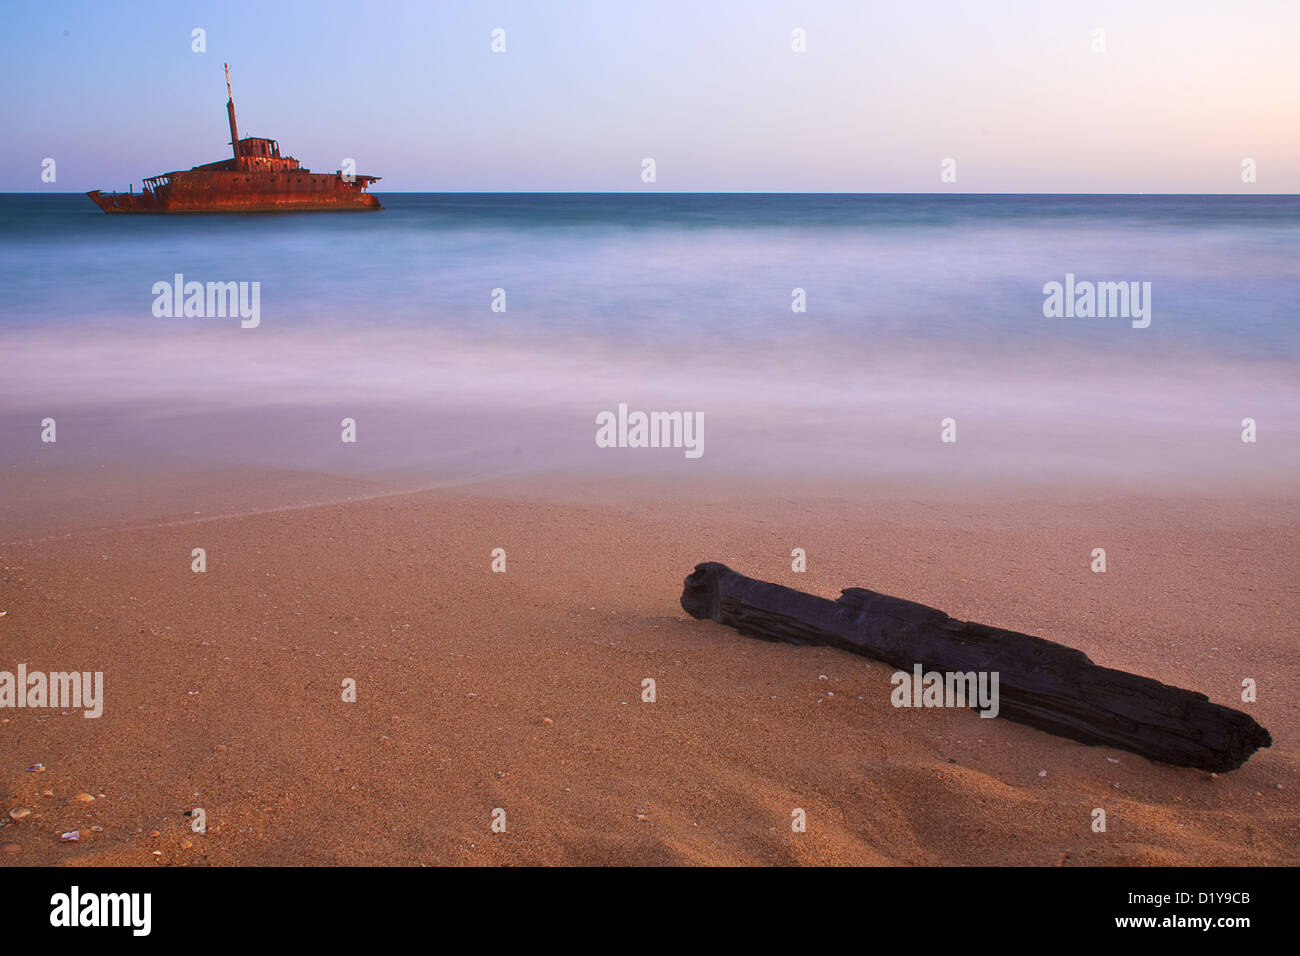 A shipwreck on the shores of a beach, with a log in the foreground Stock Photo